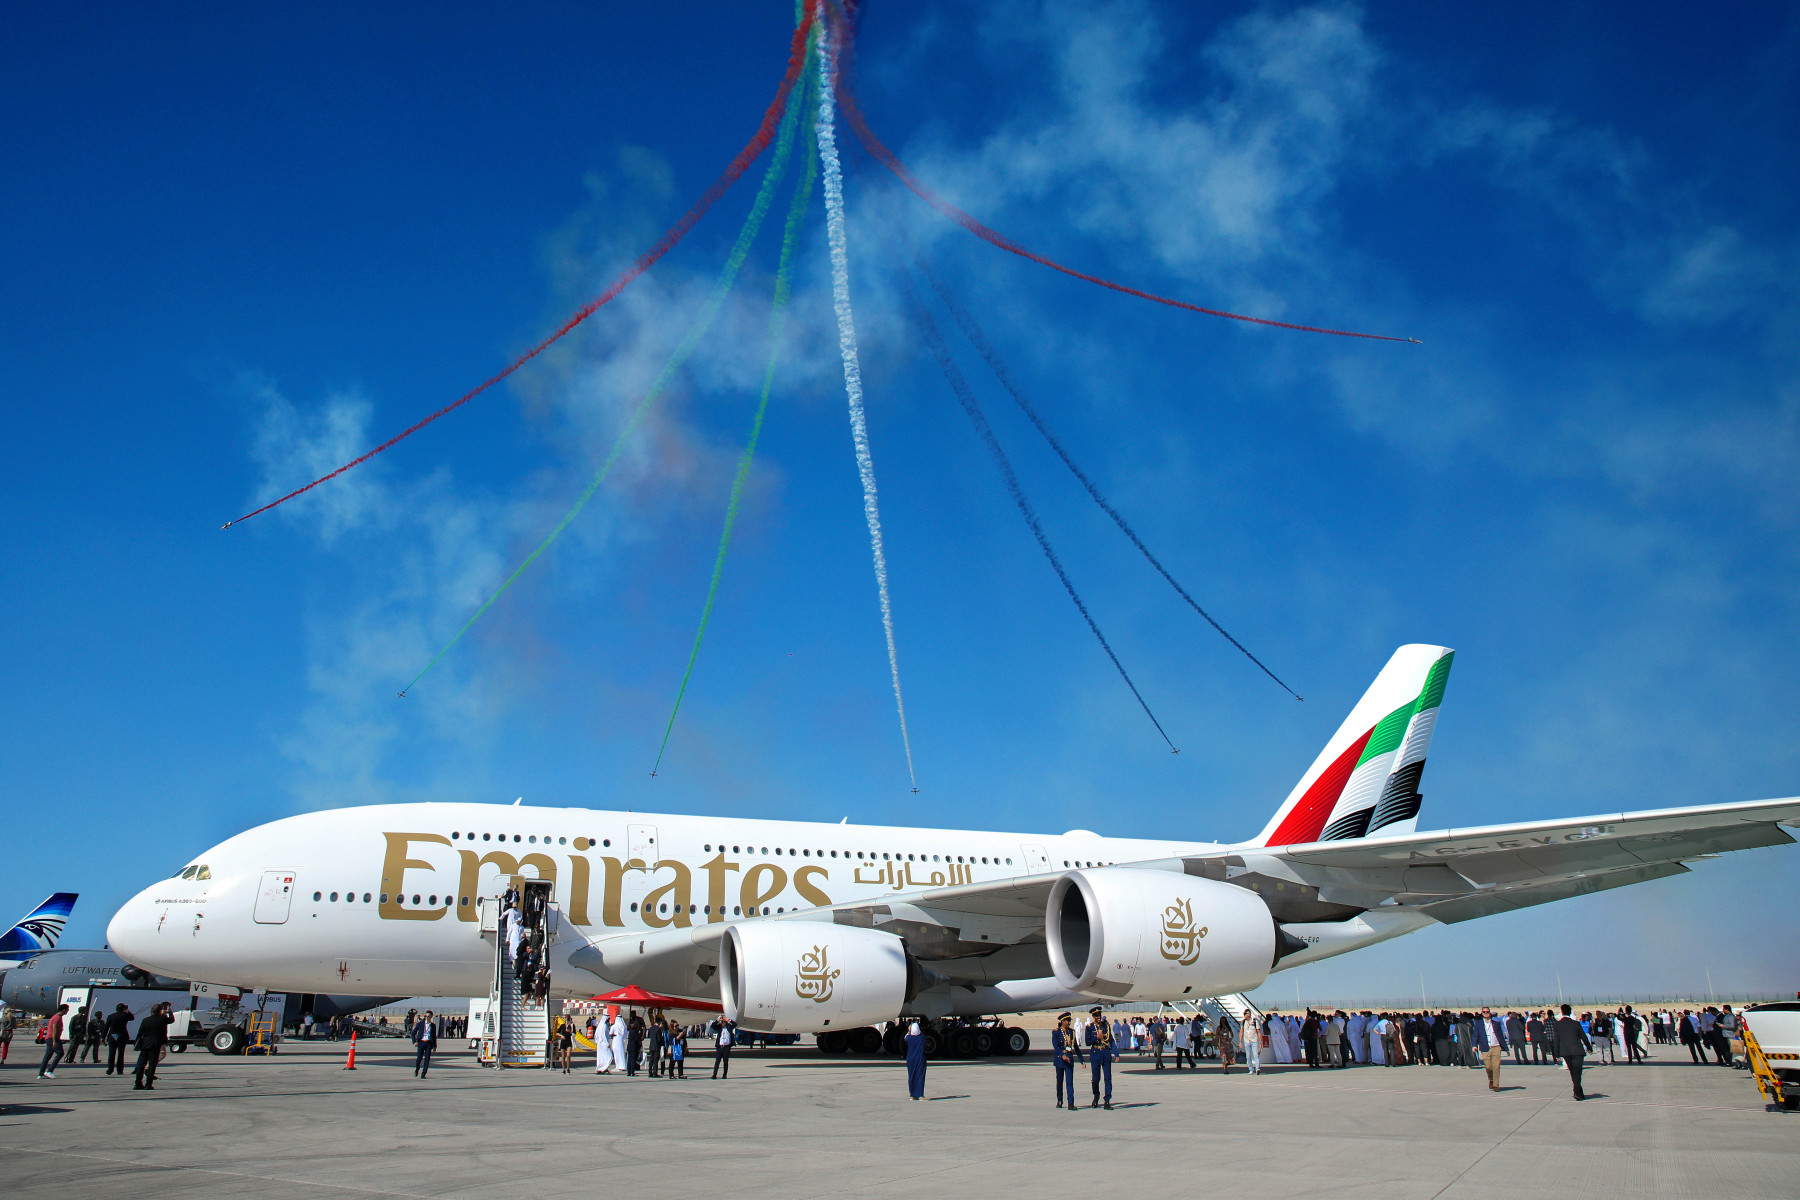 PICTURE OF EMIRATES A380 AT THE AIRSHOW.